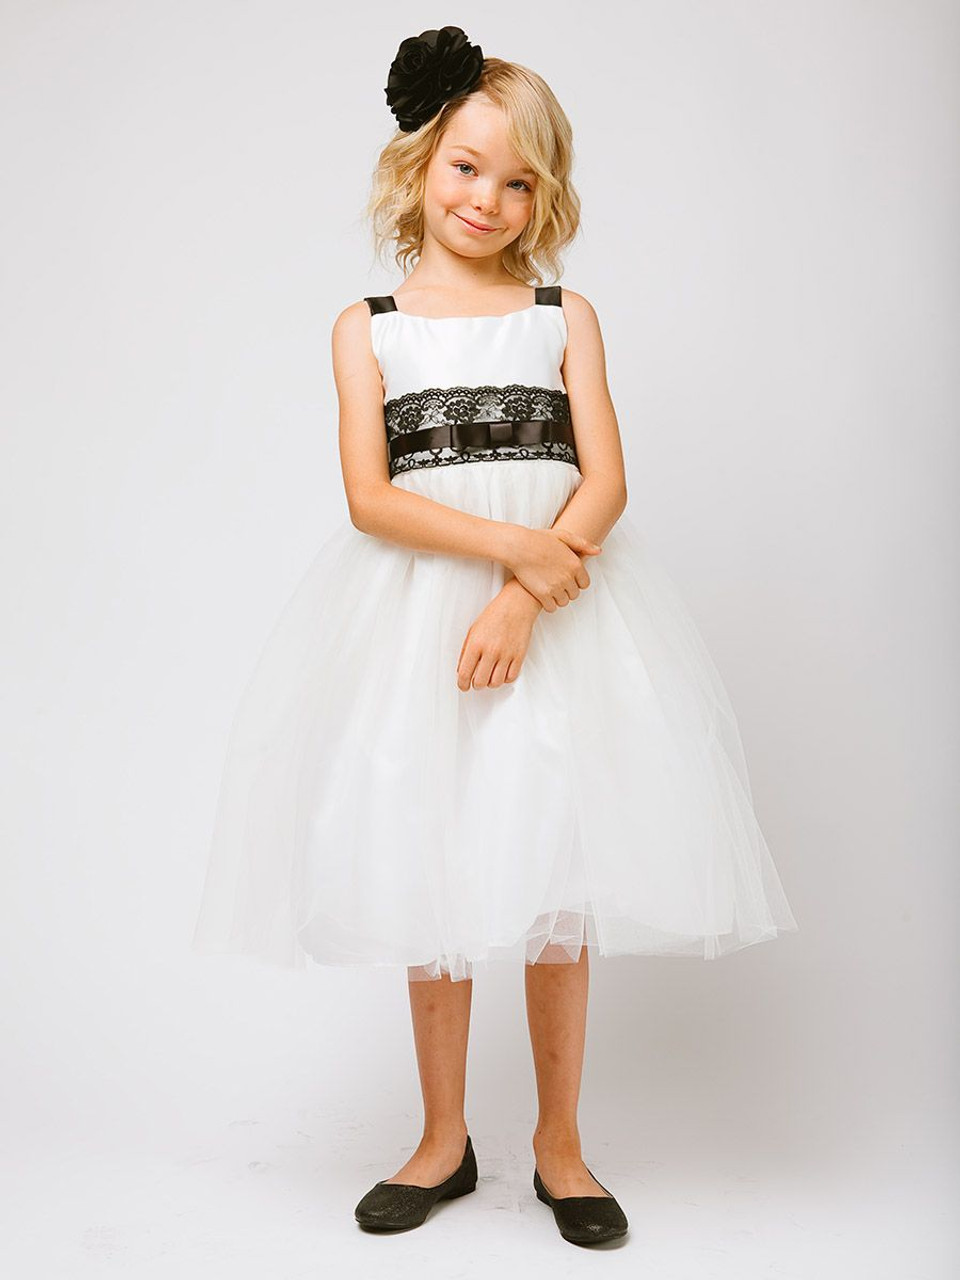 Off-White Satin & Tulle Lace Dress - Pink Princess